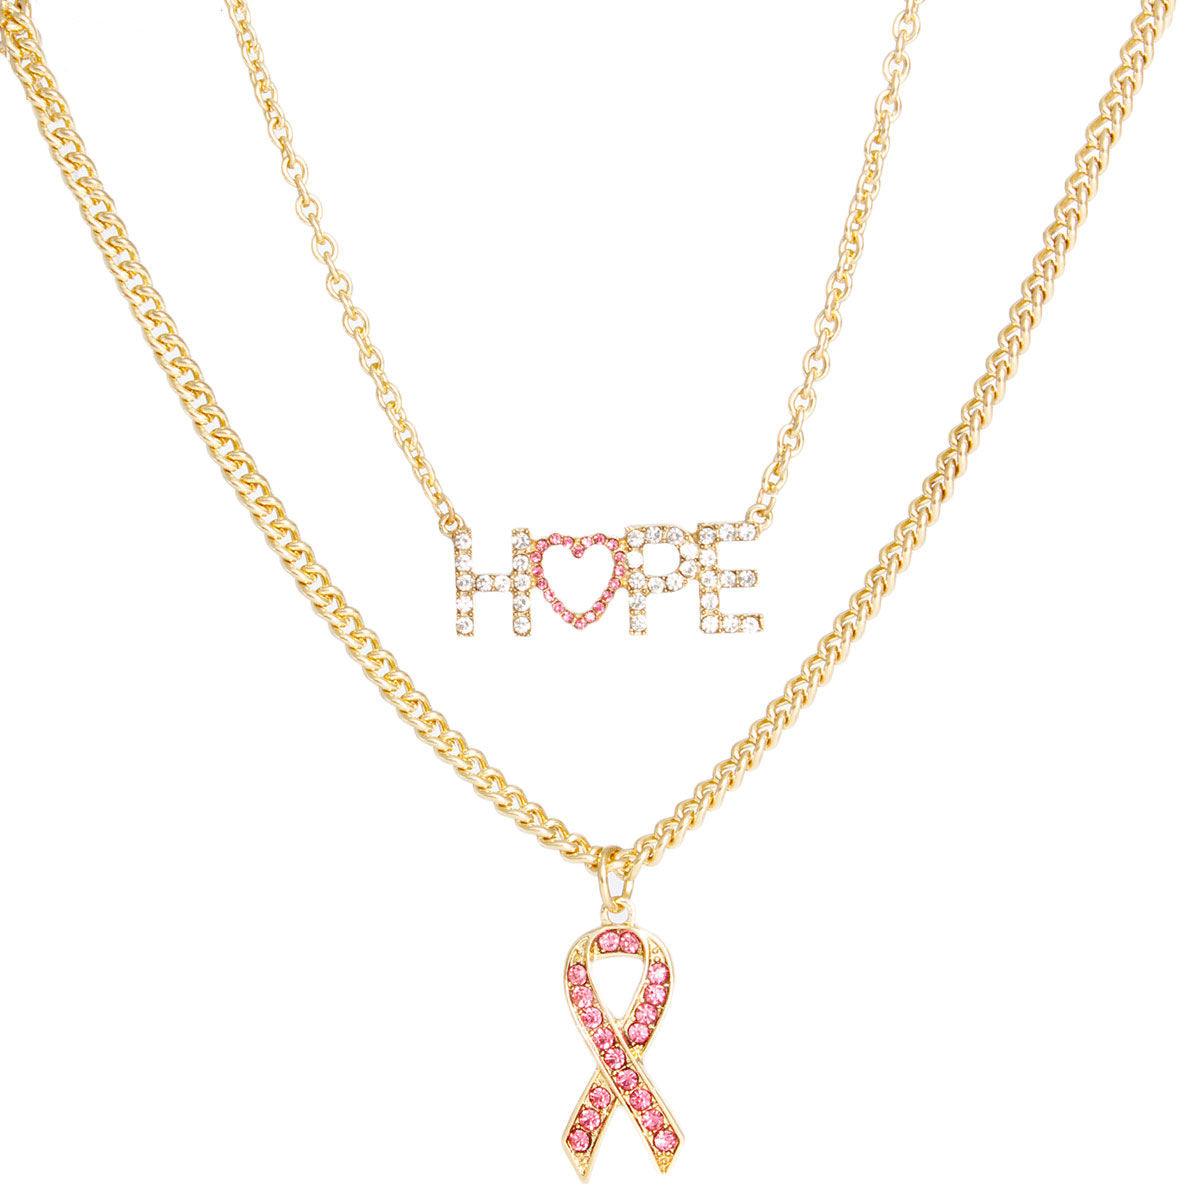 Show Your Support in Style with a Pink Gold Hope and Ribbon Necklace